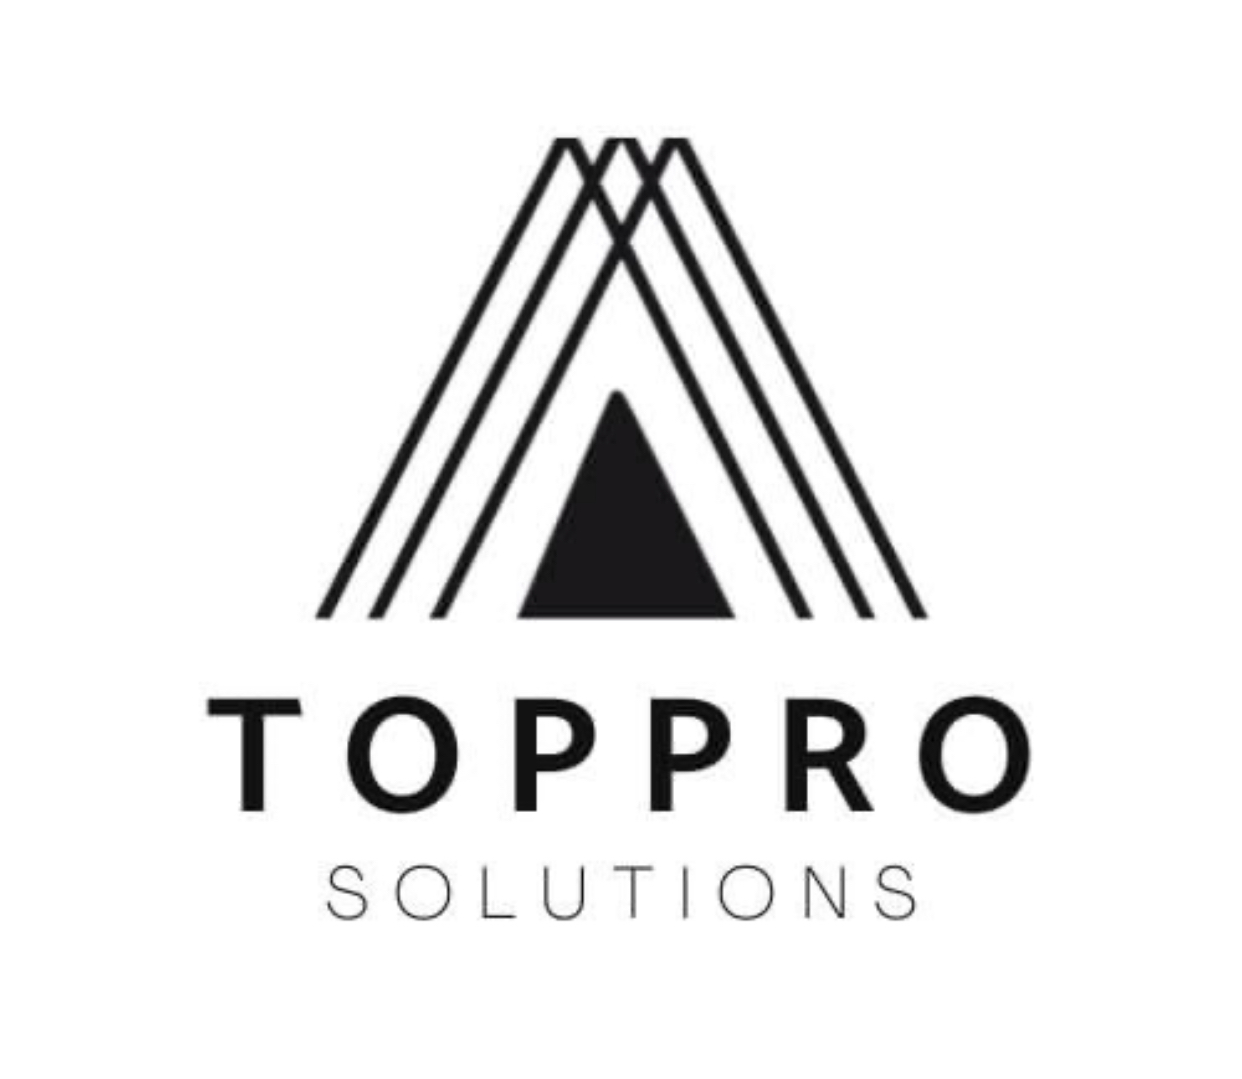 Toppro solutions in Elioplus